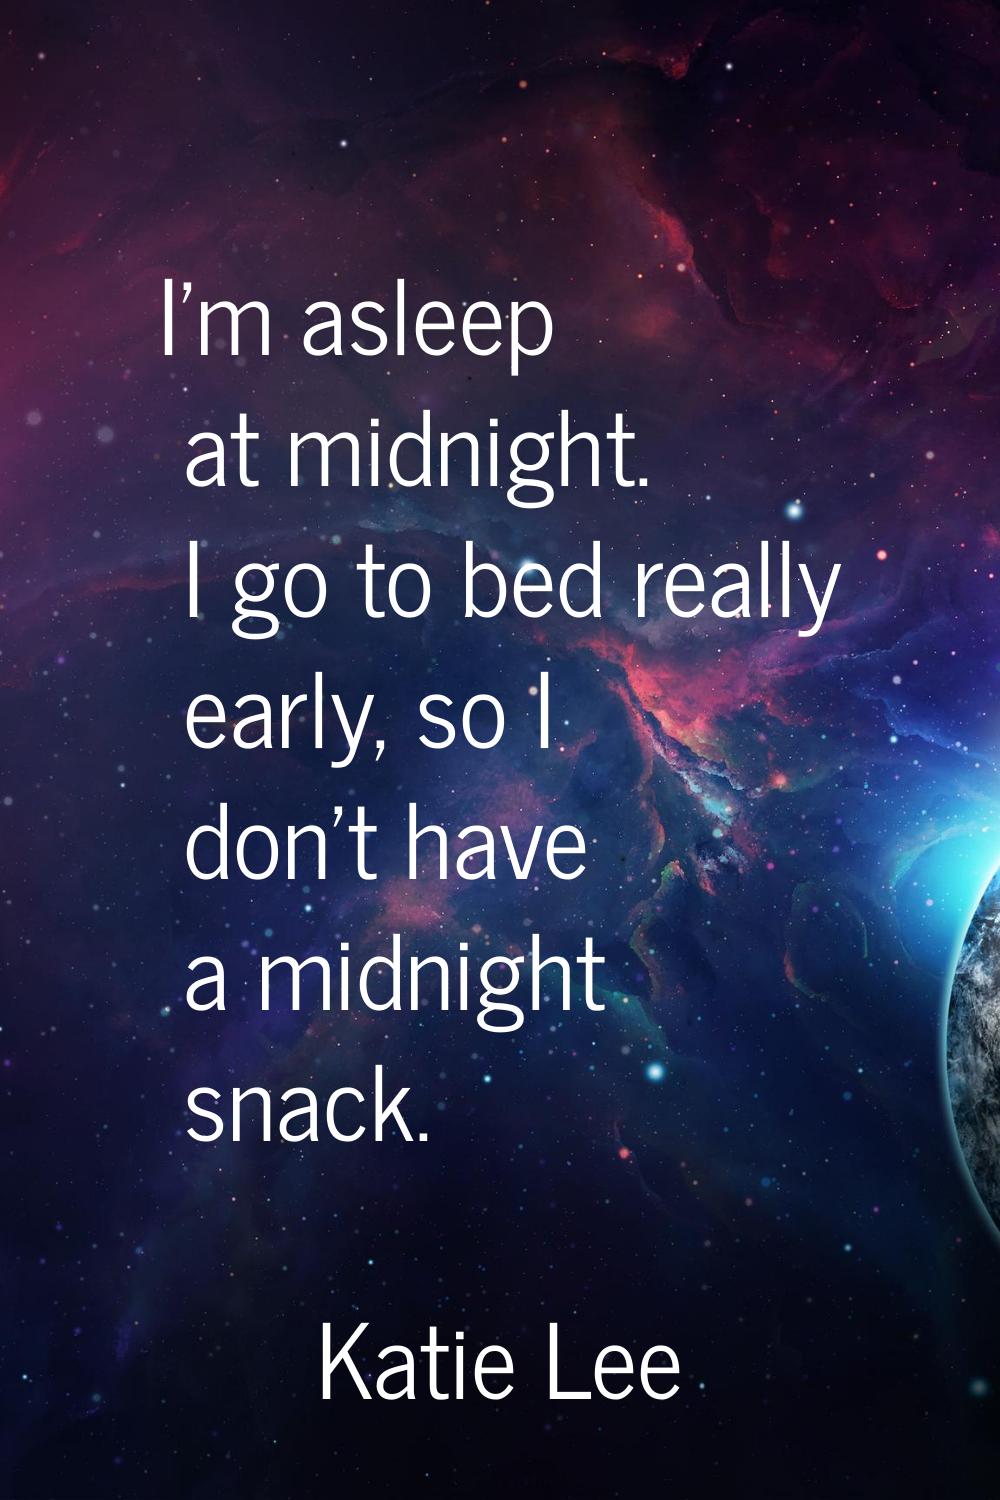 I'm asleep at midnight. I go to bed really early, so I don't have a midnight snack.